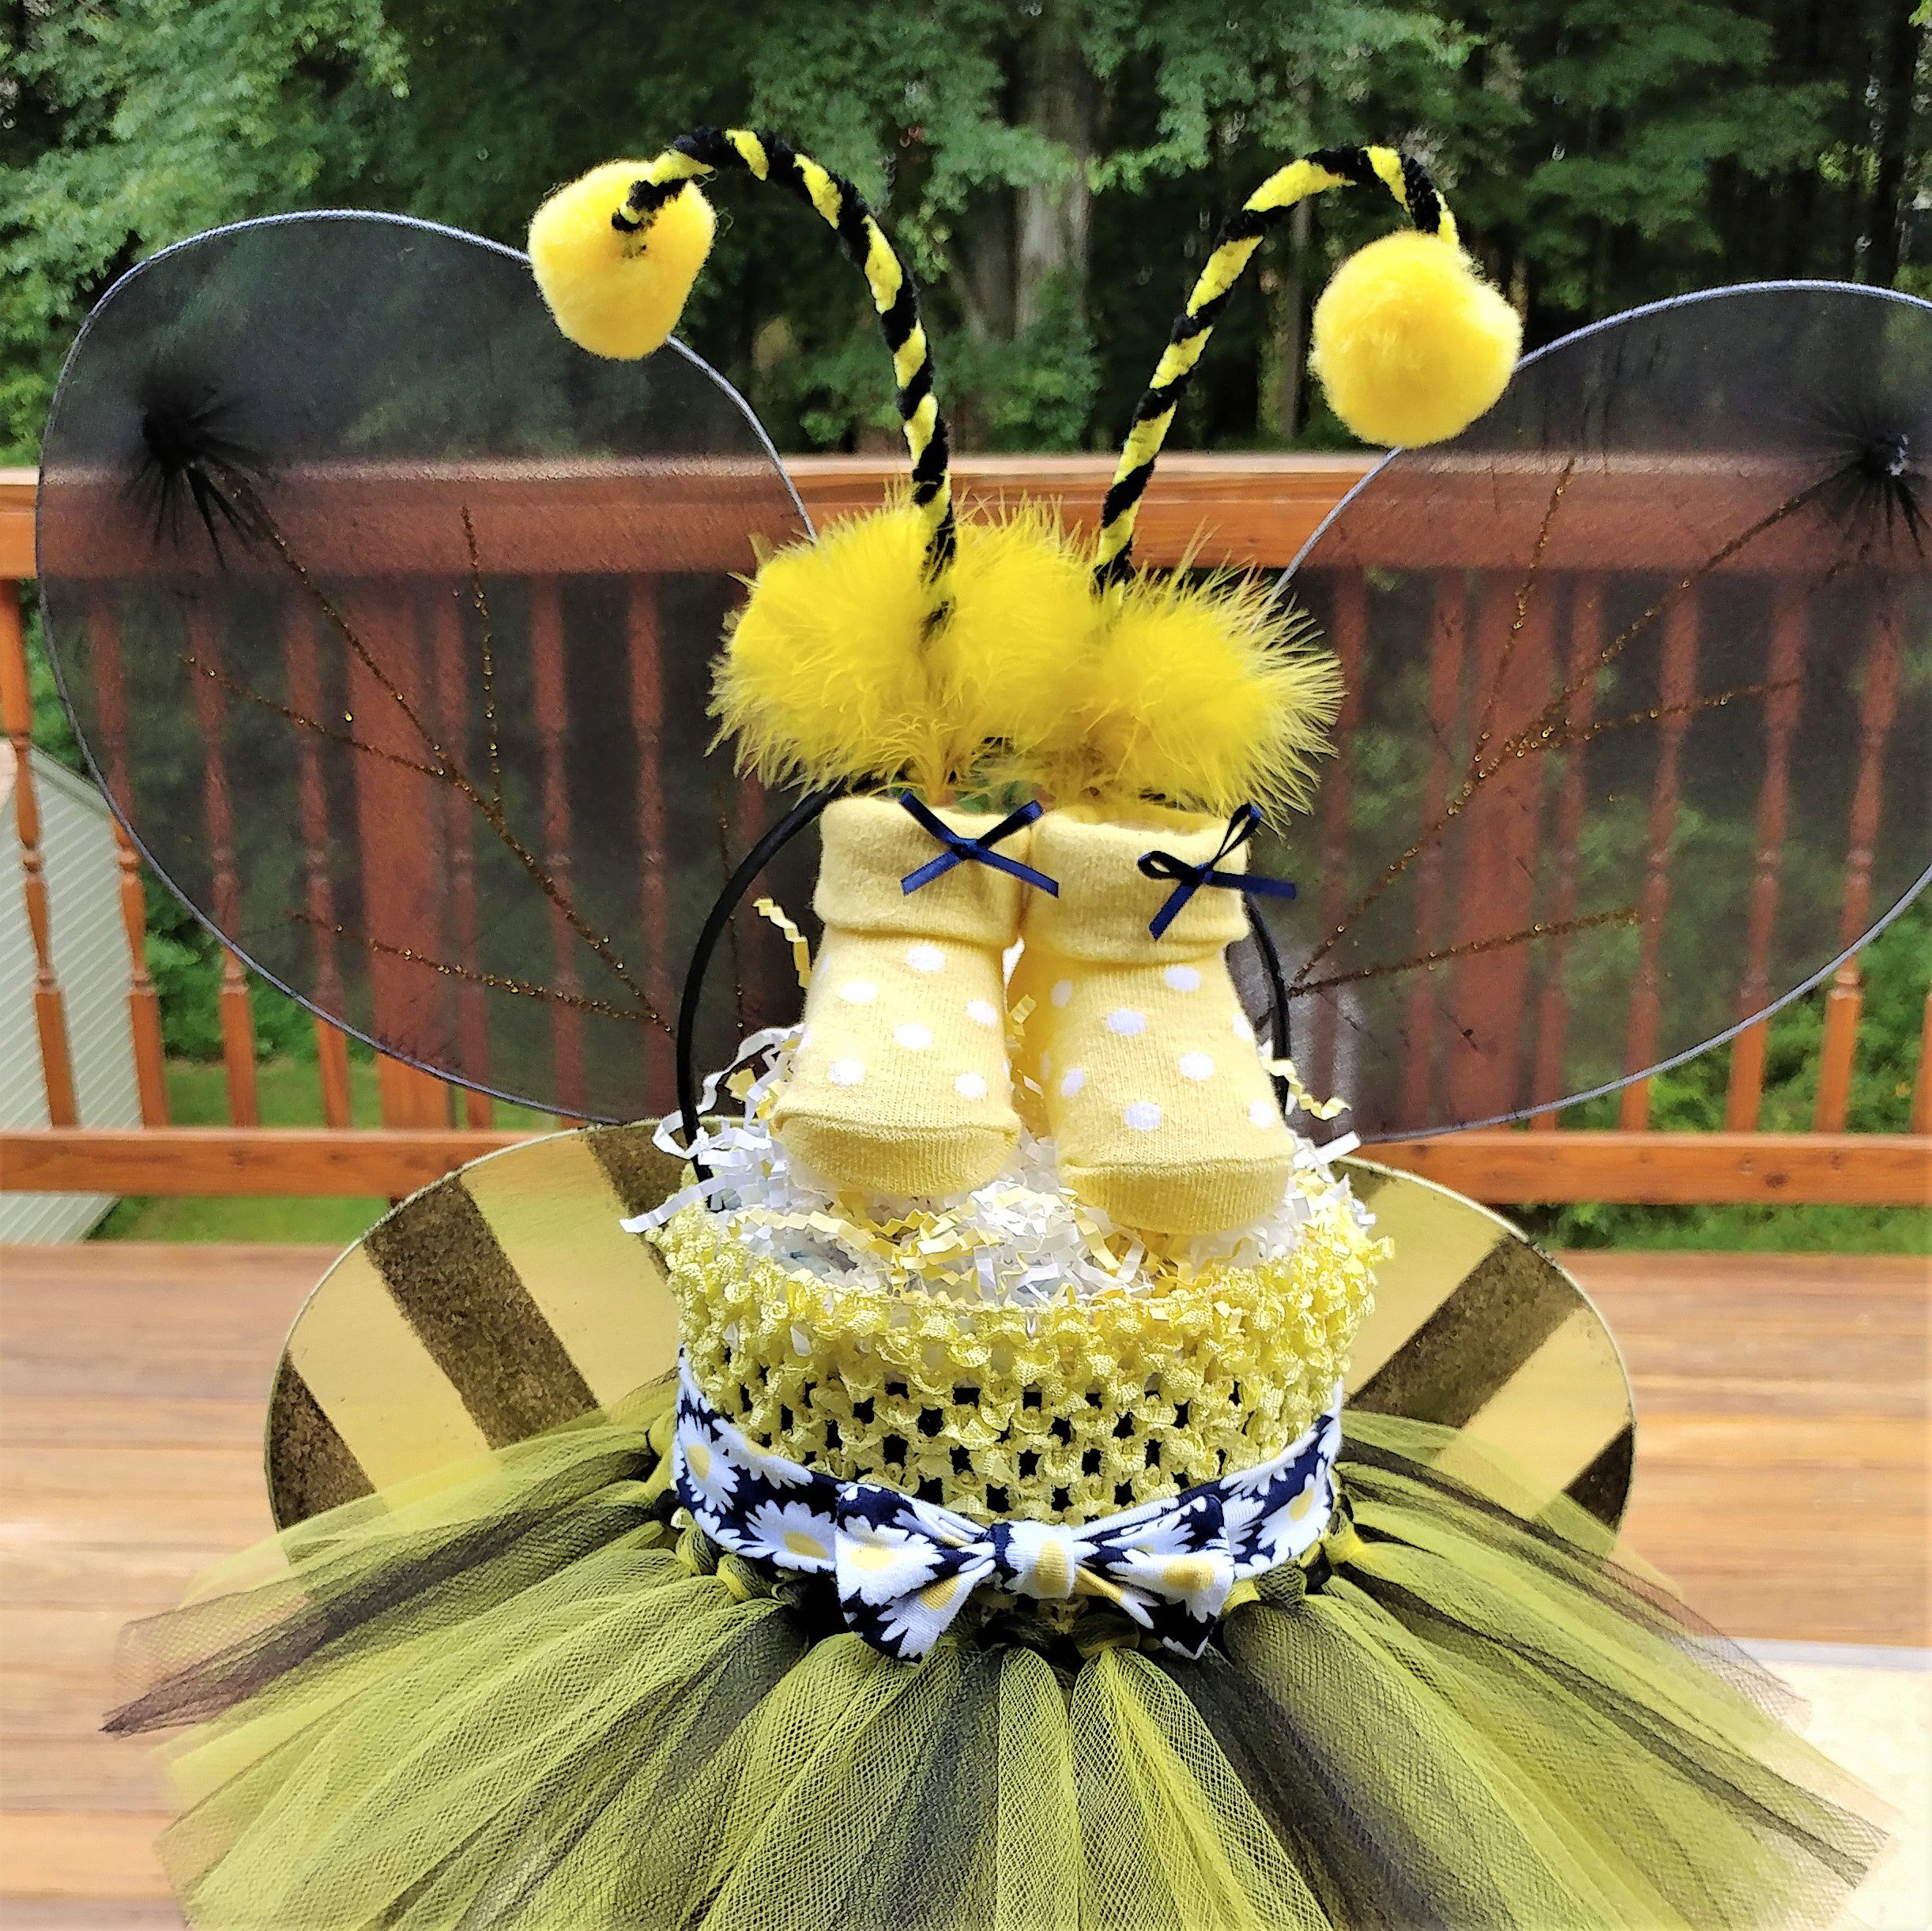 Bumble Bee Diaper Cake- This is an adorable three tier yellow and black cake.